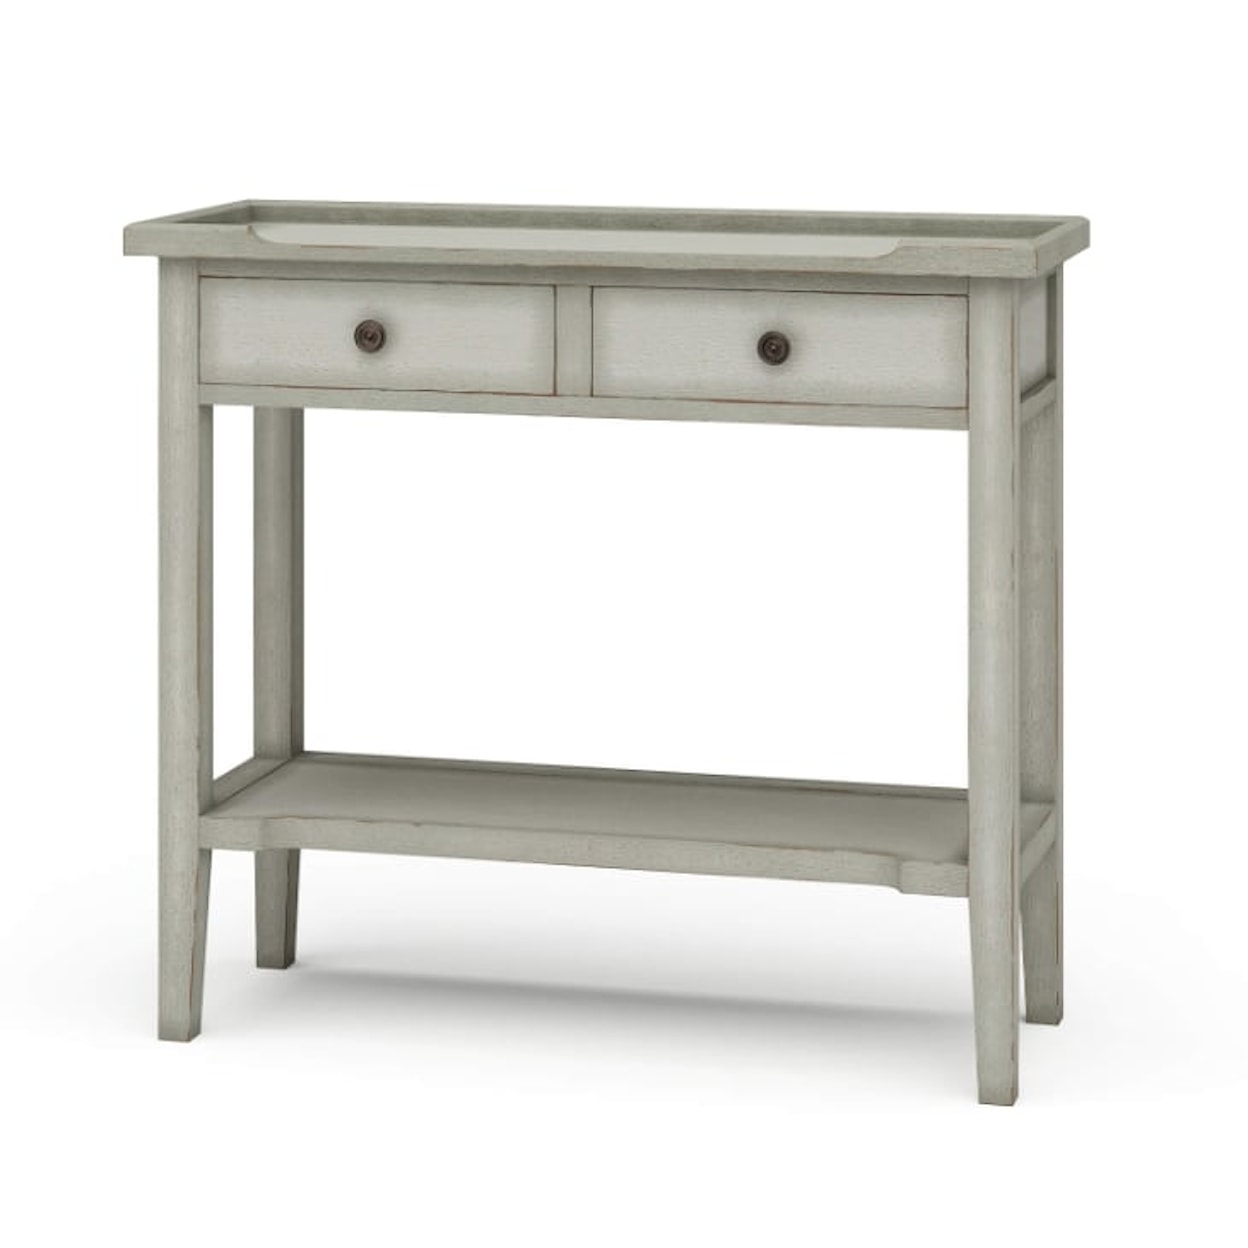 Bramble Aries Eton Console Finished in Whisper